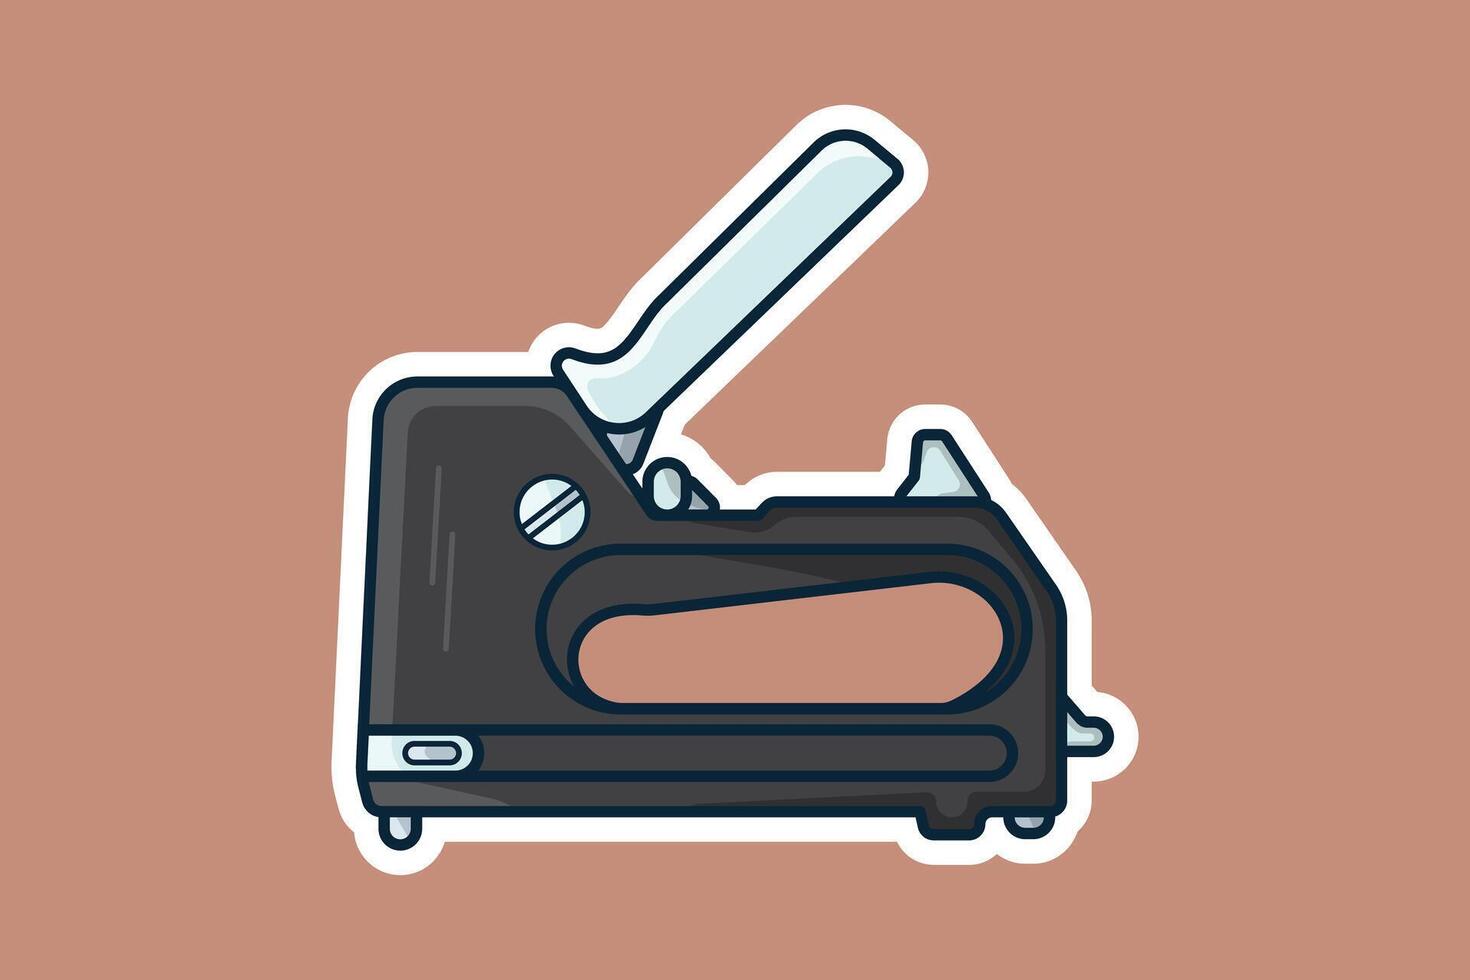 Colorful Staple Gun Sticker design vector illustration. Stationery shop working element icon concept. Stapler gun for join and repair, stapler sign sticker design icon with shadow.